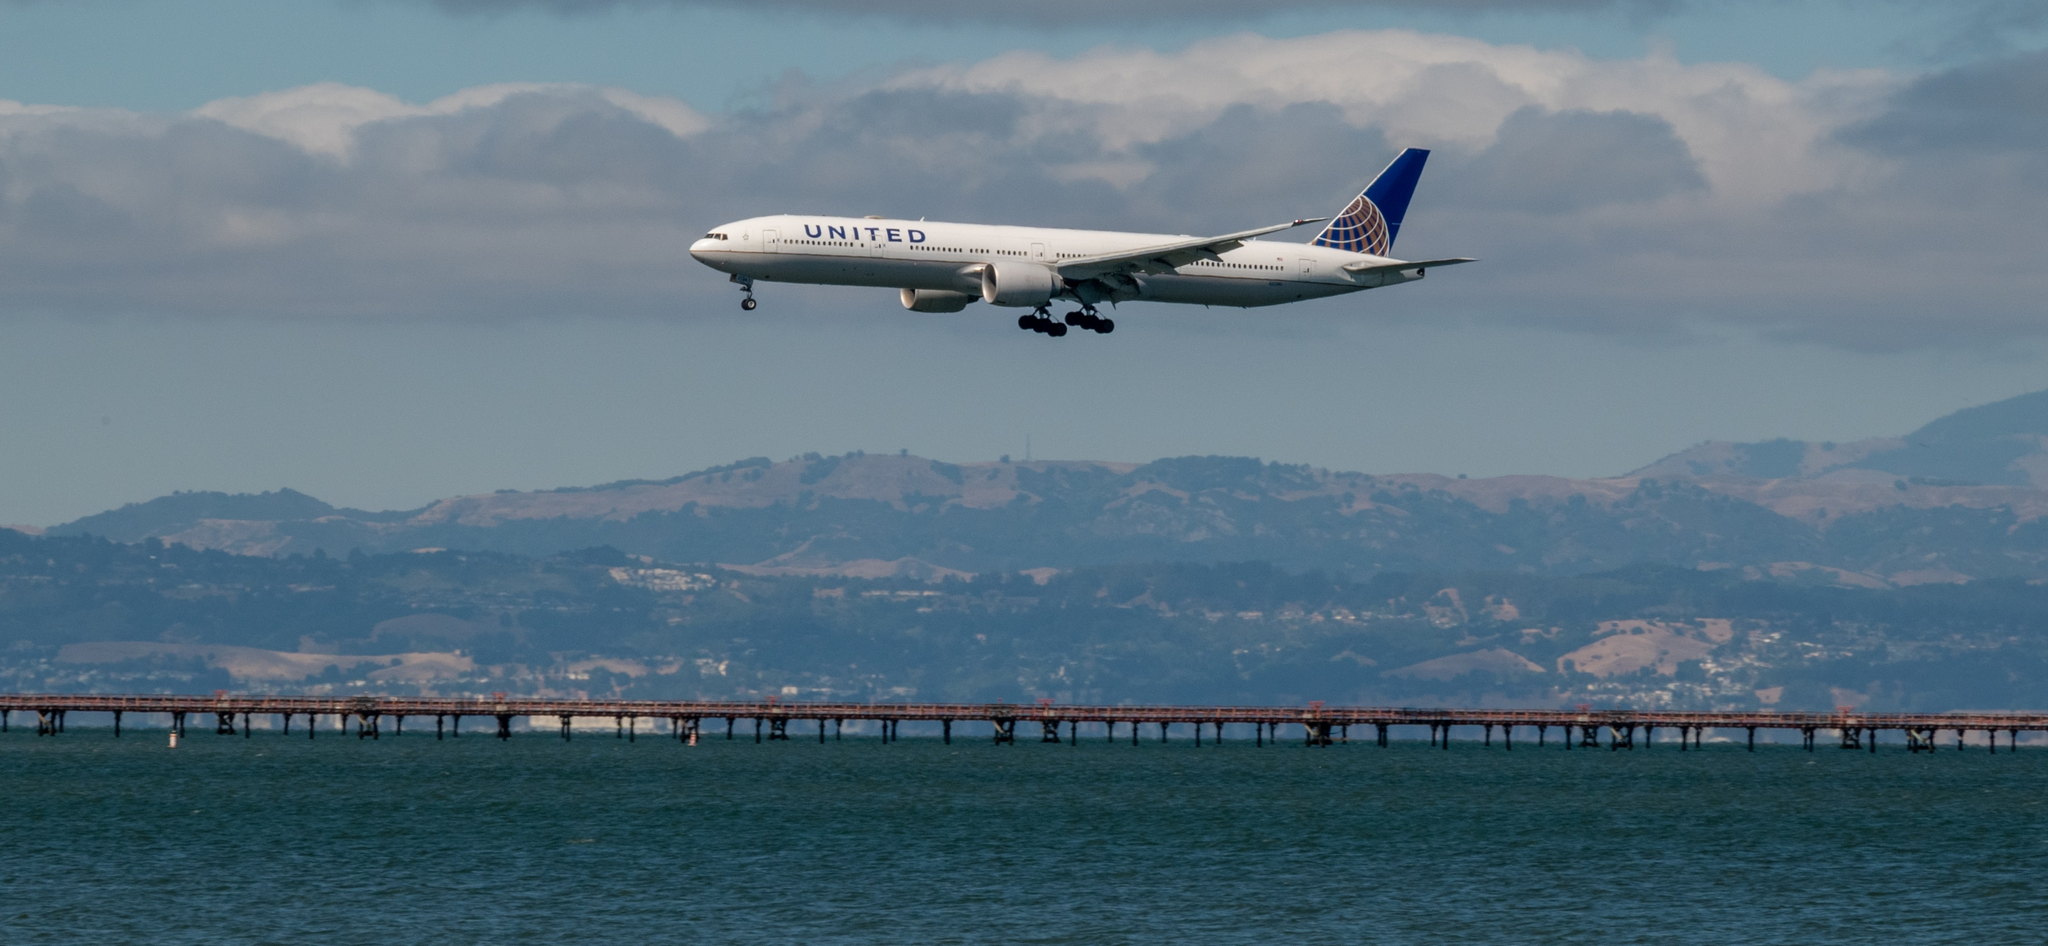 united airline landing over the bay in san francisco